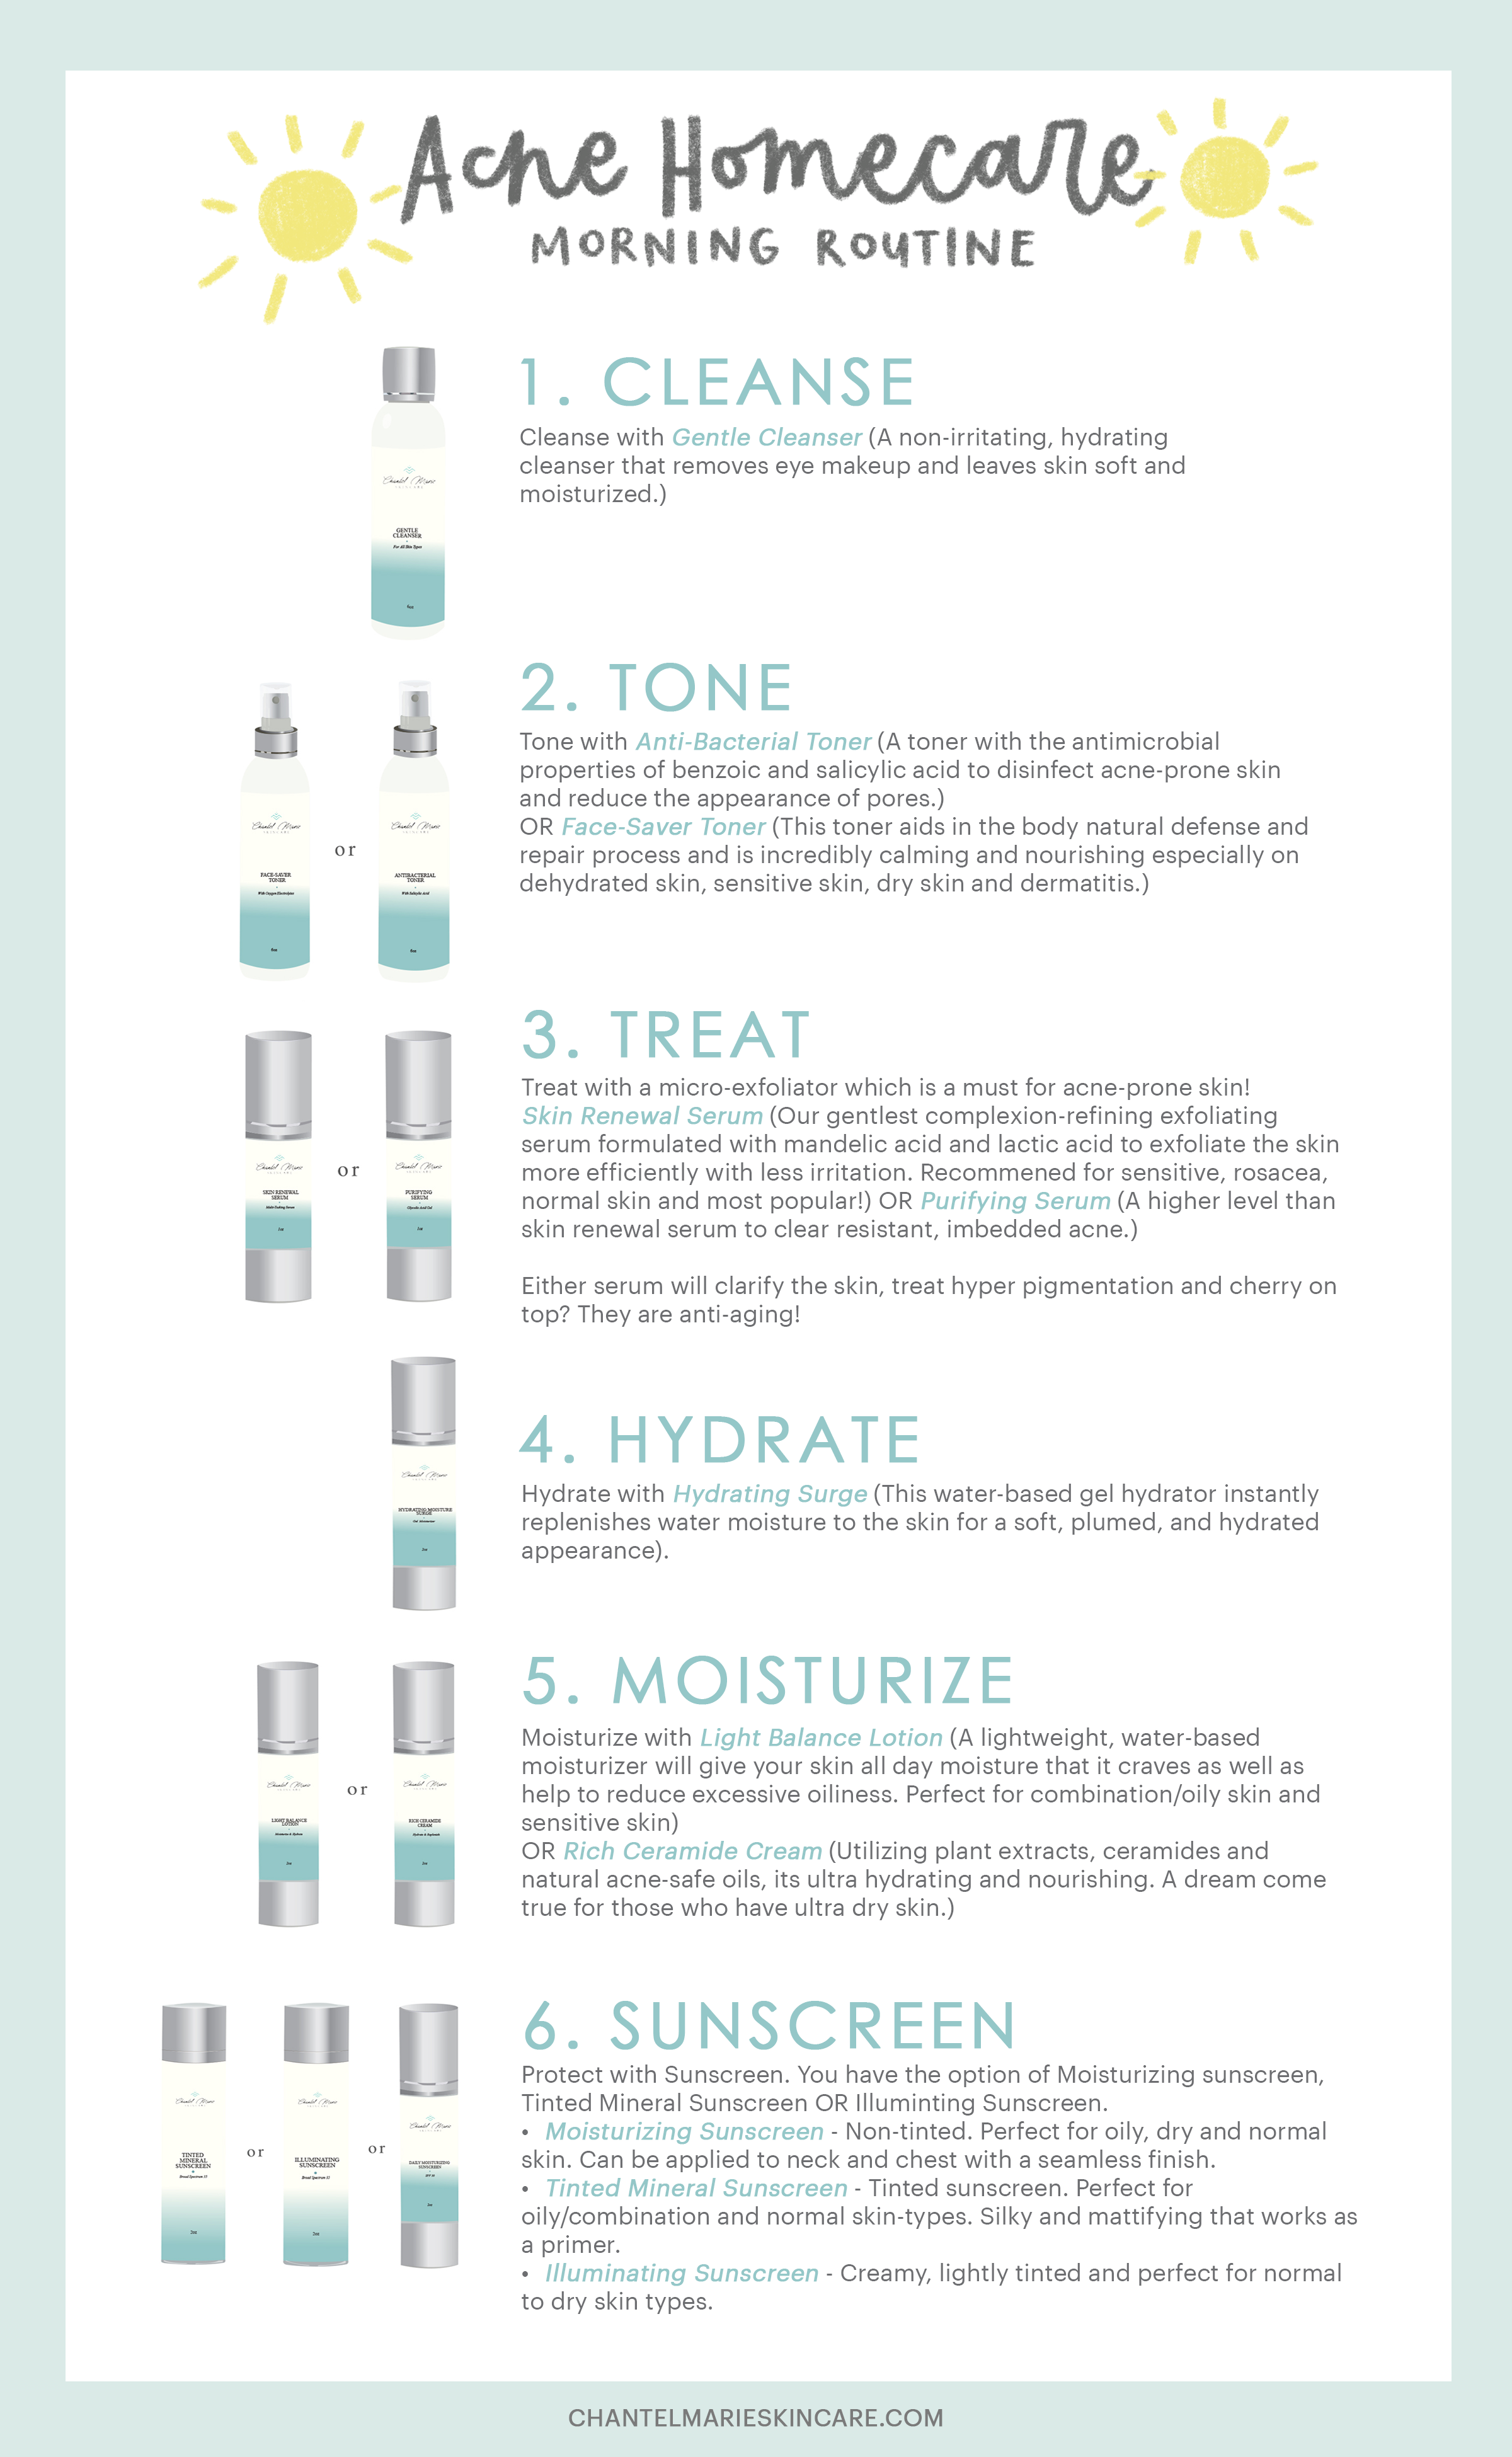 Chantel Marie Skincare - Morning Routine.png  by chantel